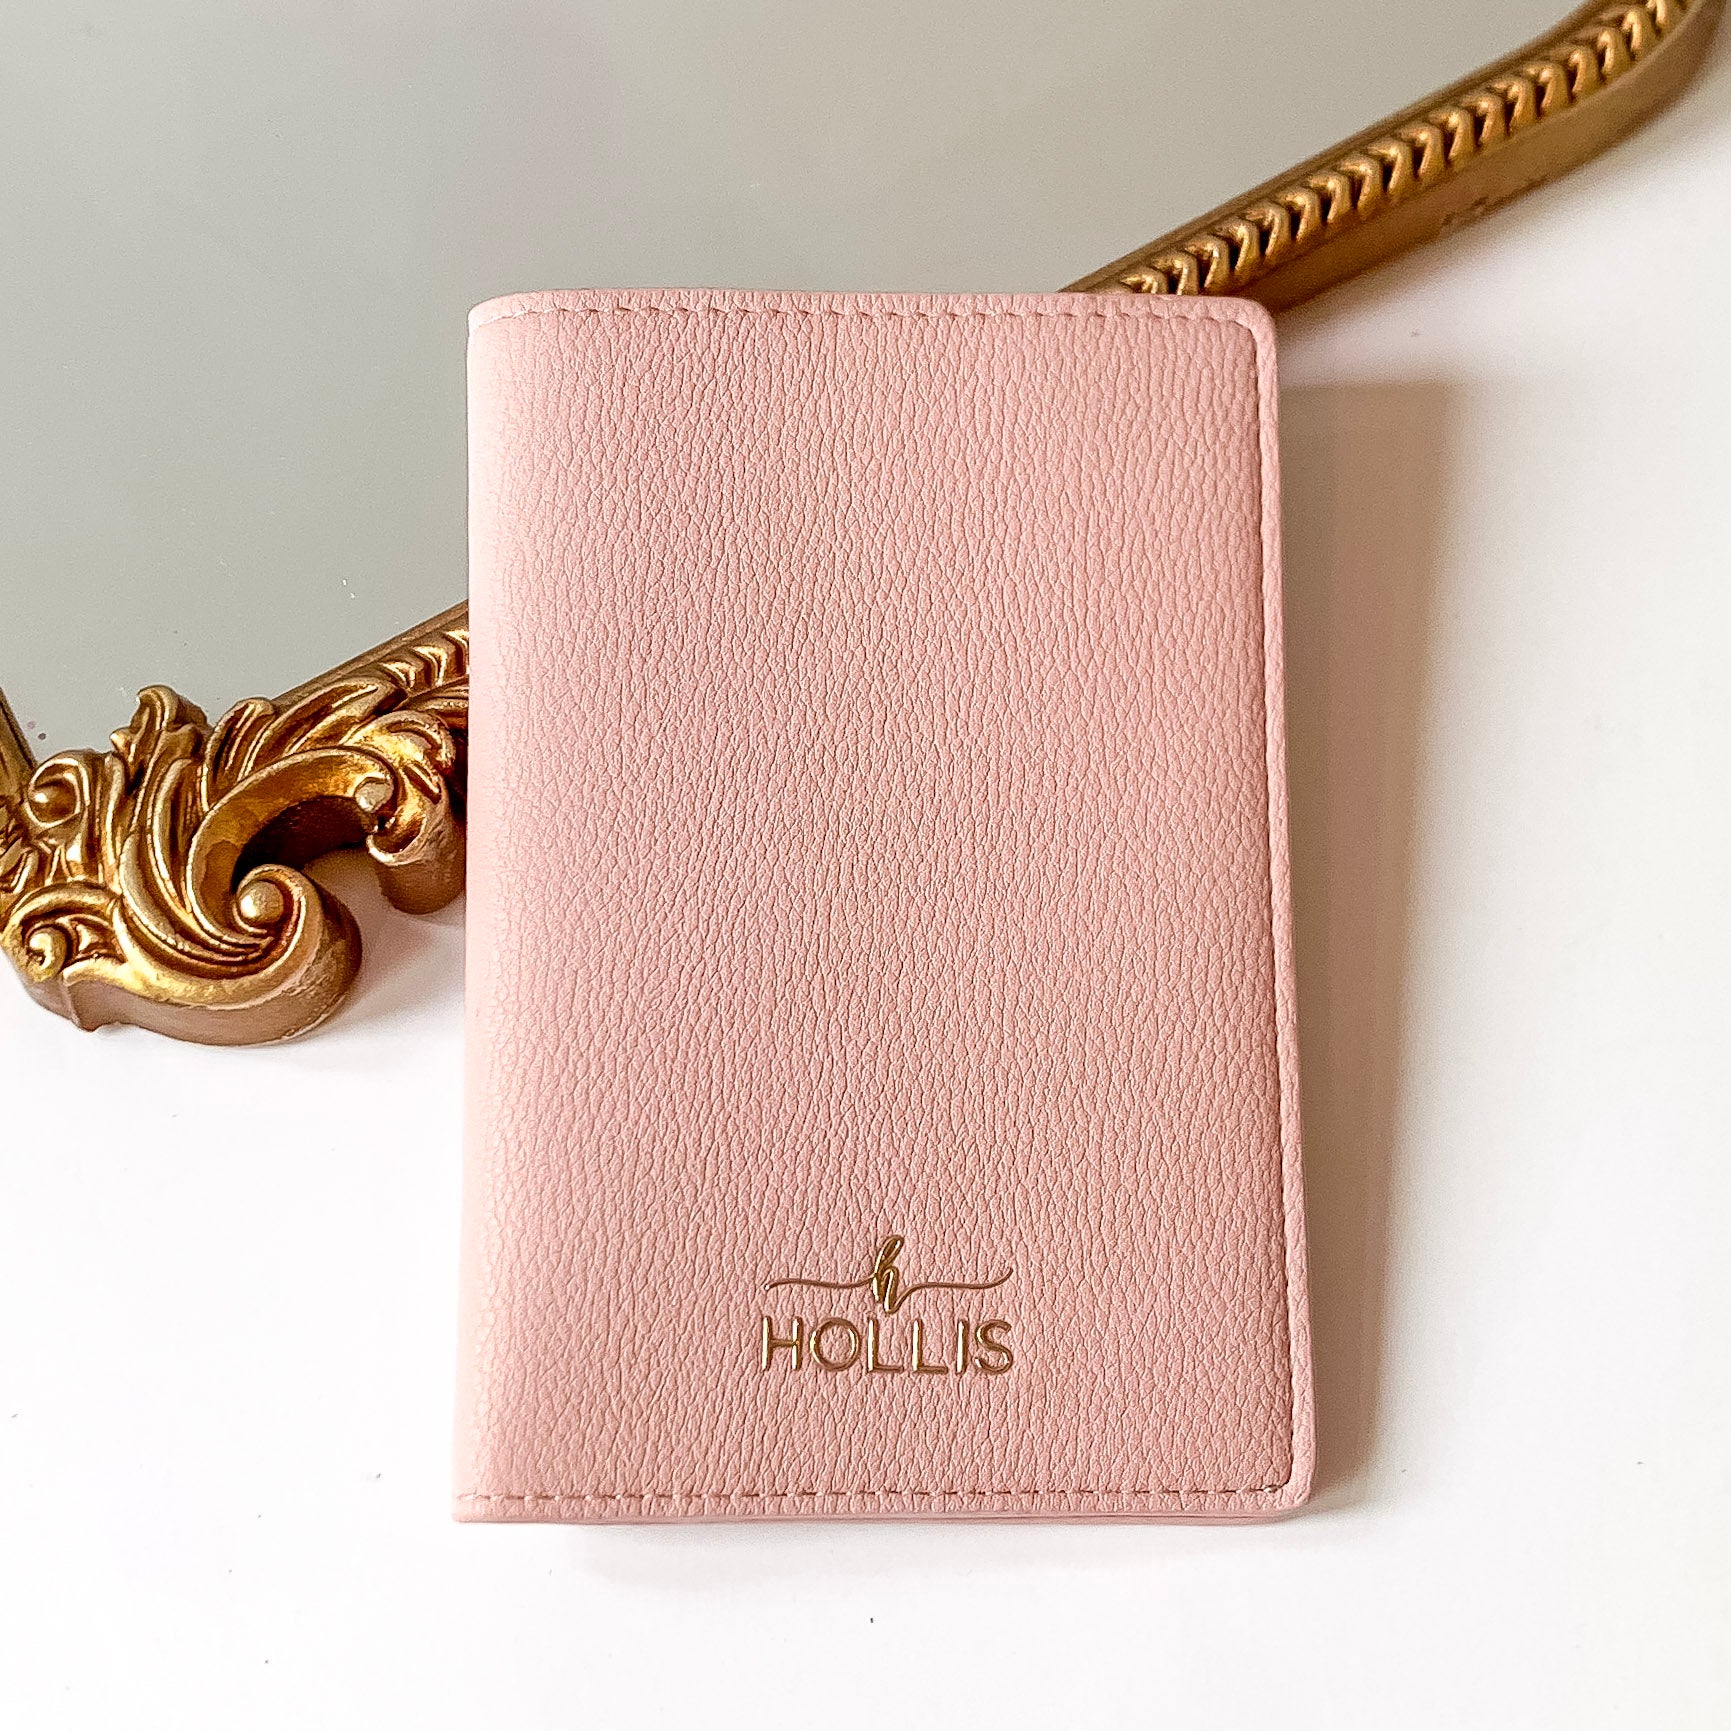 Blush pink passport holder with a gold HOLLIS emblem at the bottom. This is pictured laying partially on a gold mirror on a white background. 